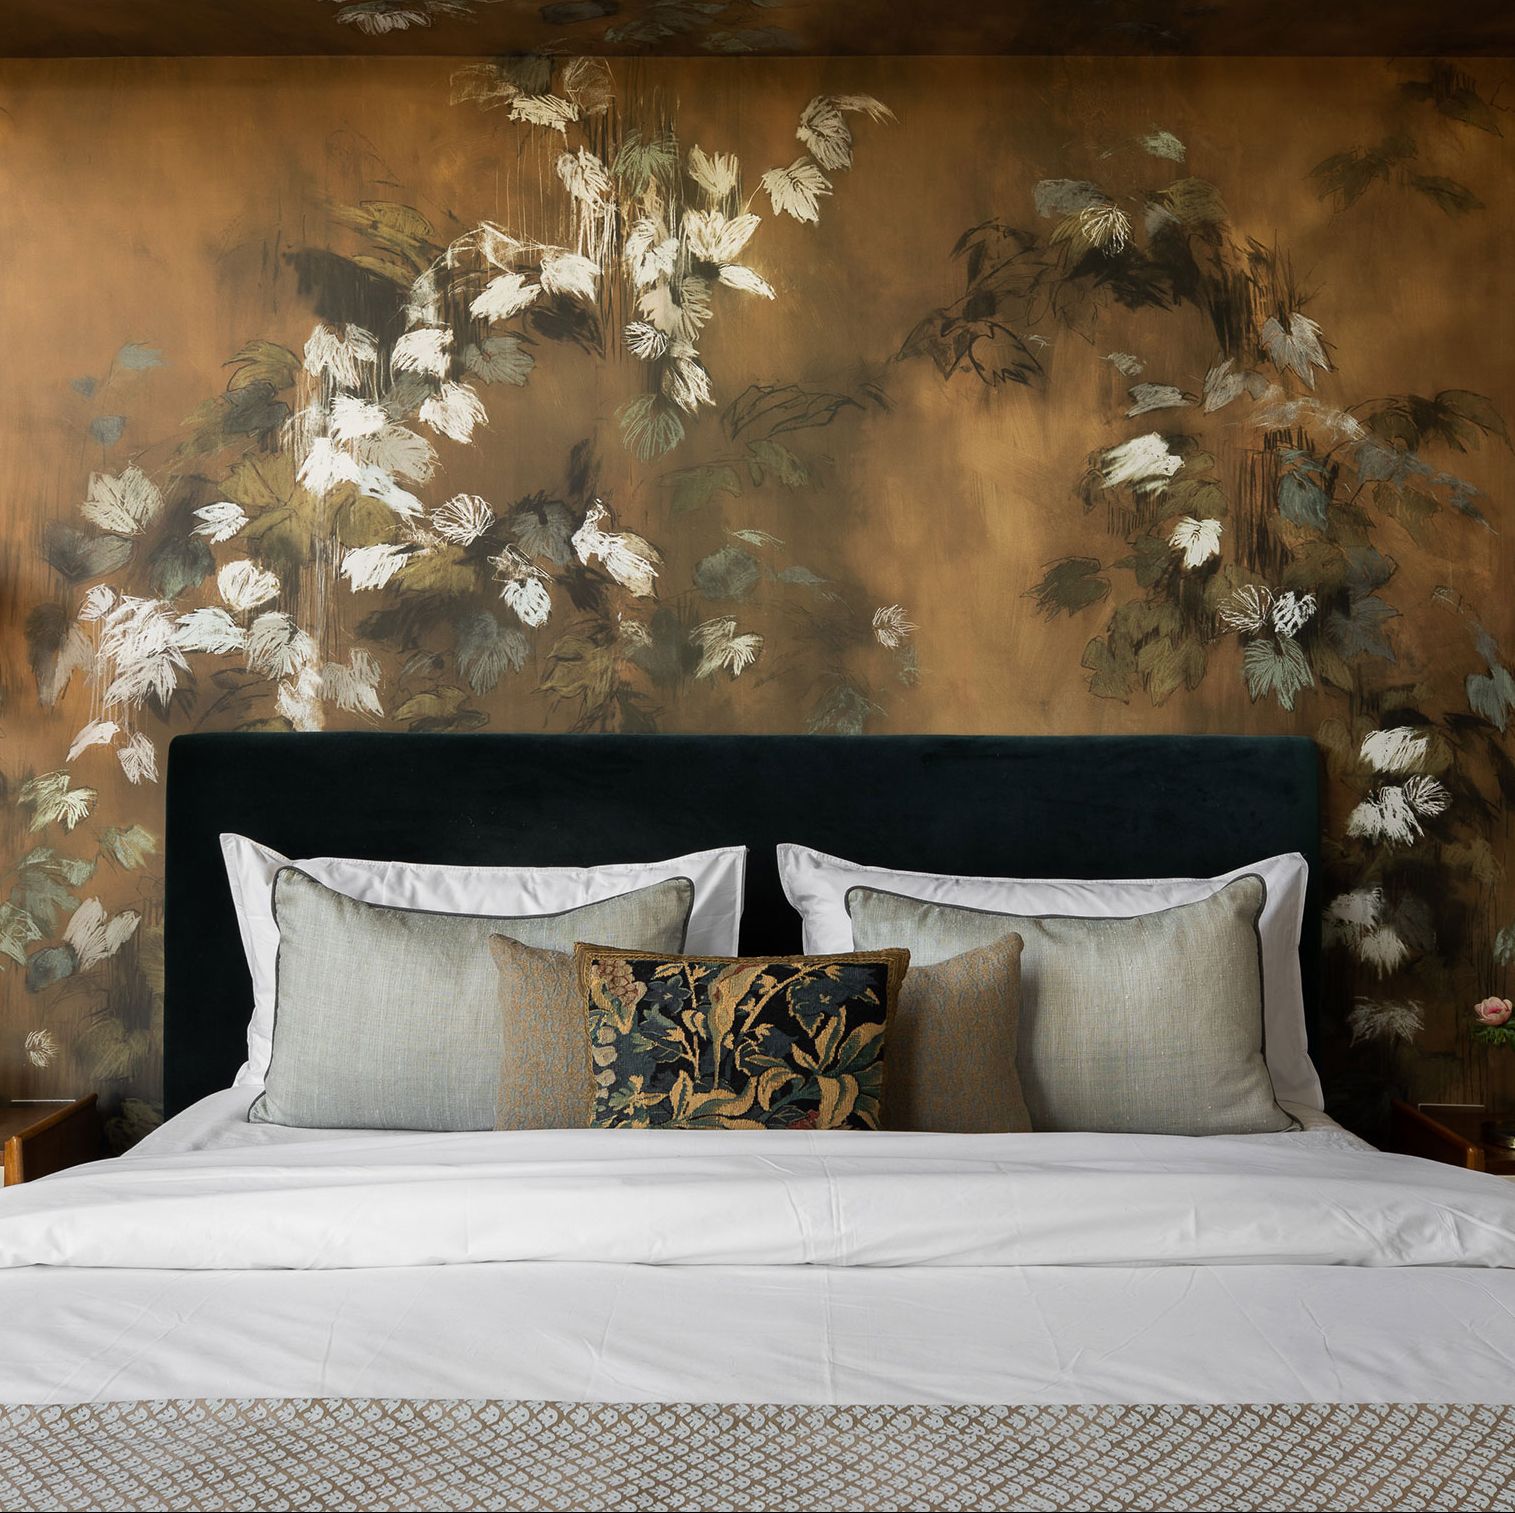 35 Bedroom Wallpaper Ideas That Are Anything But Snoozy